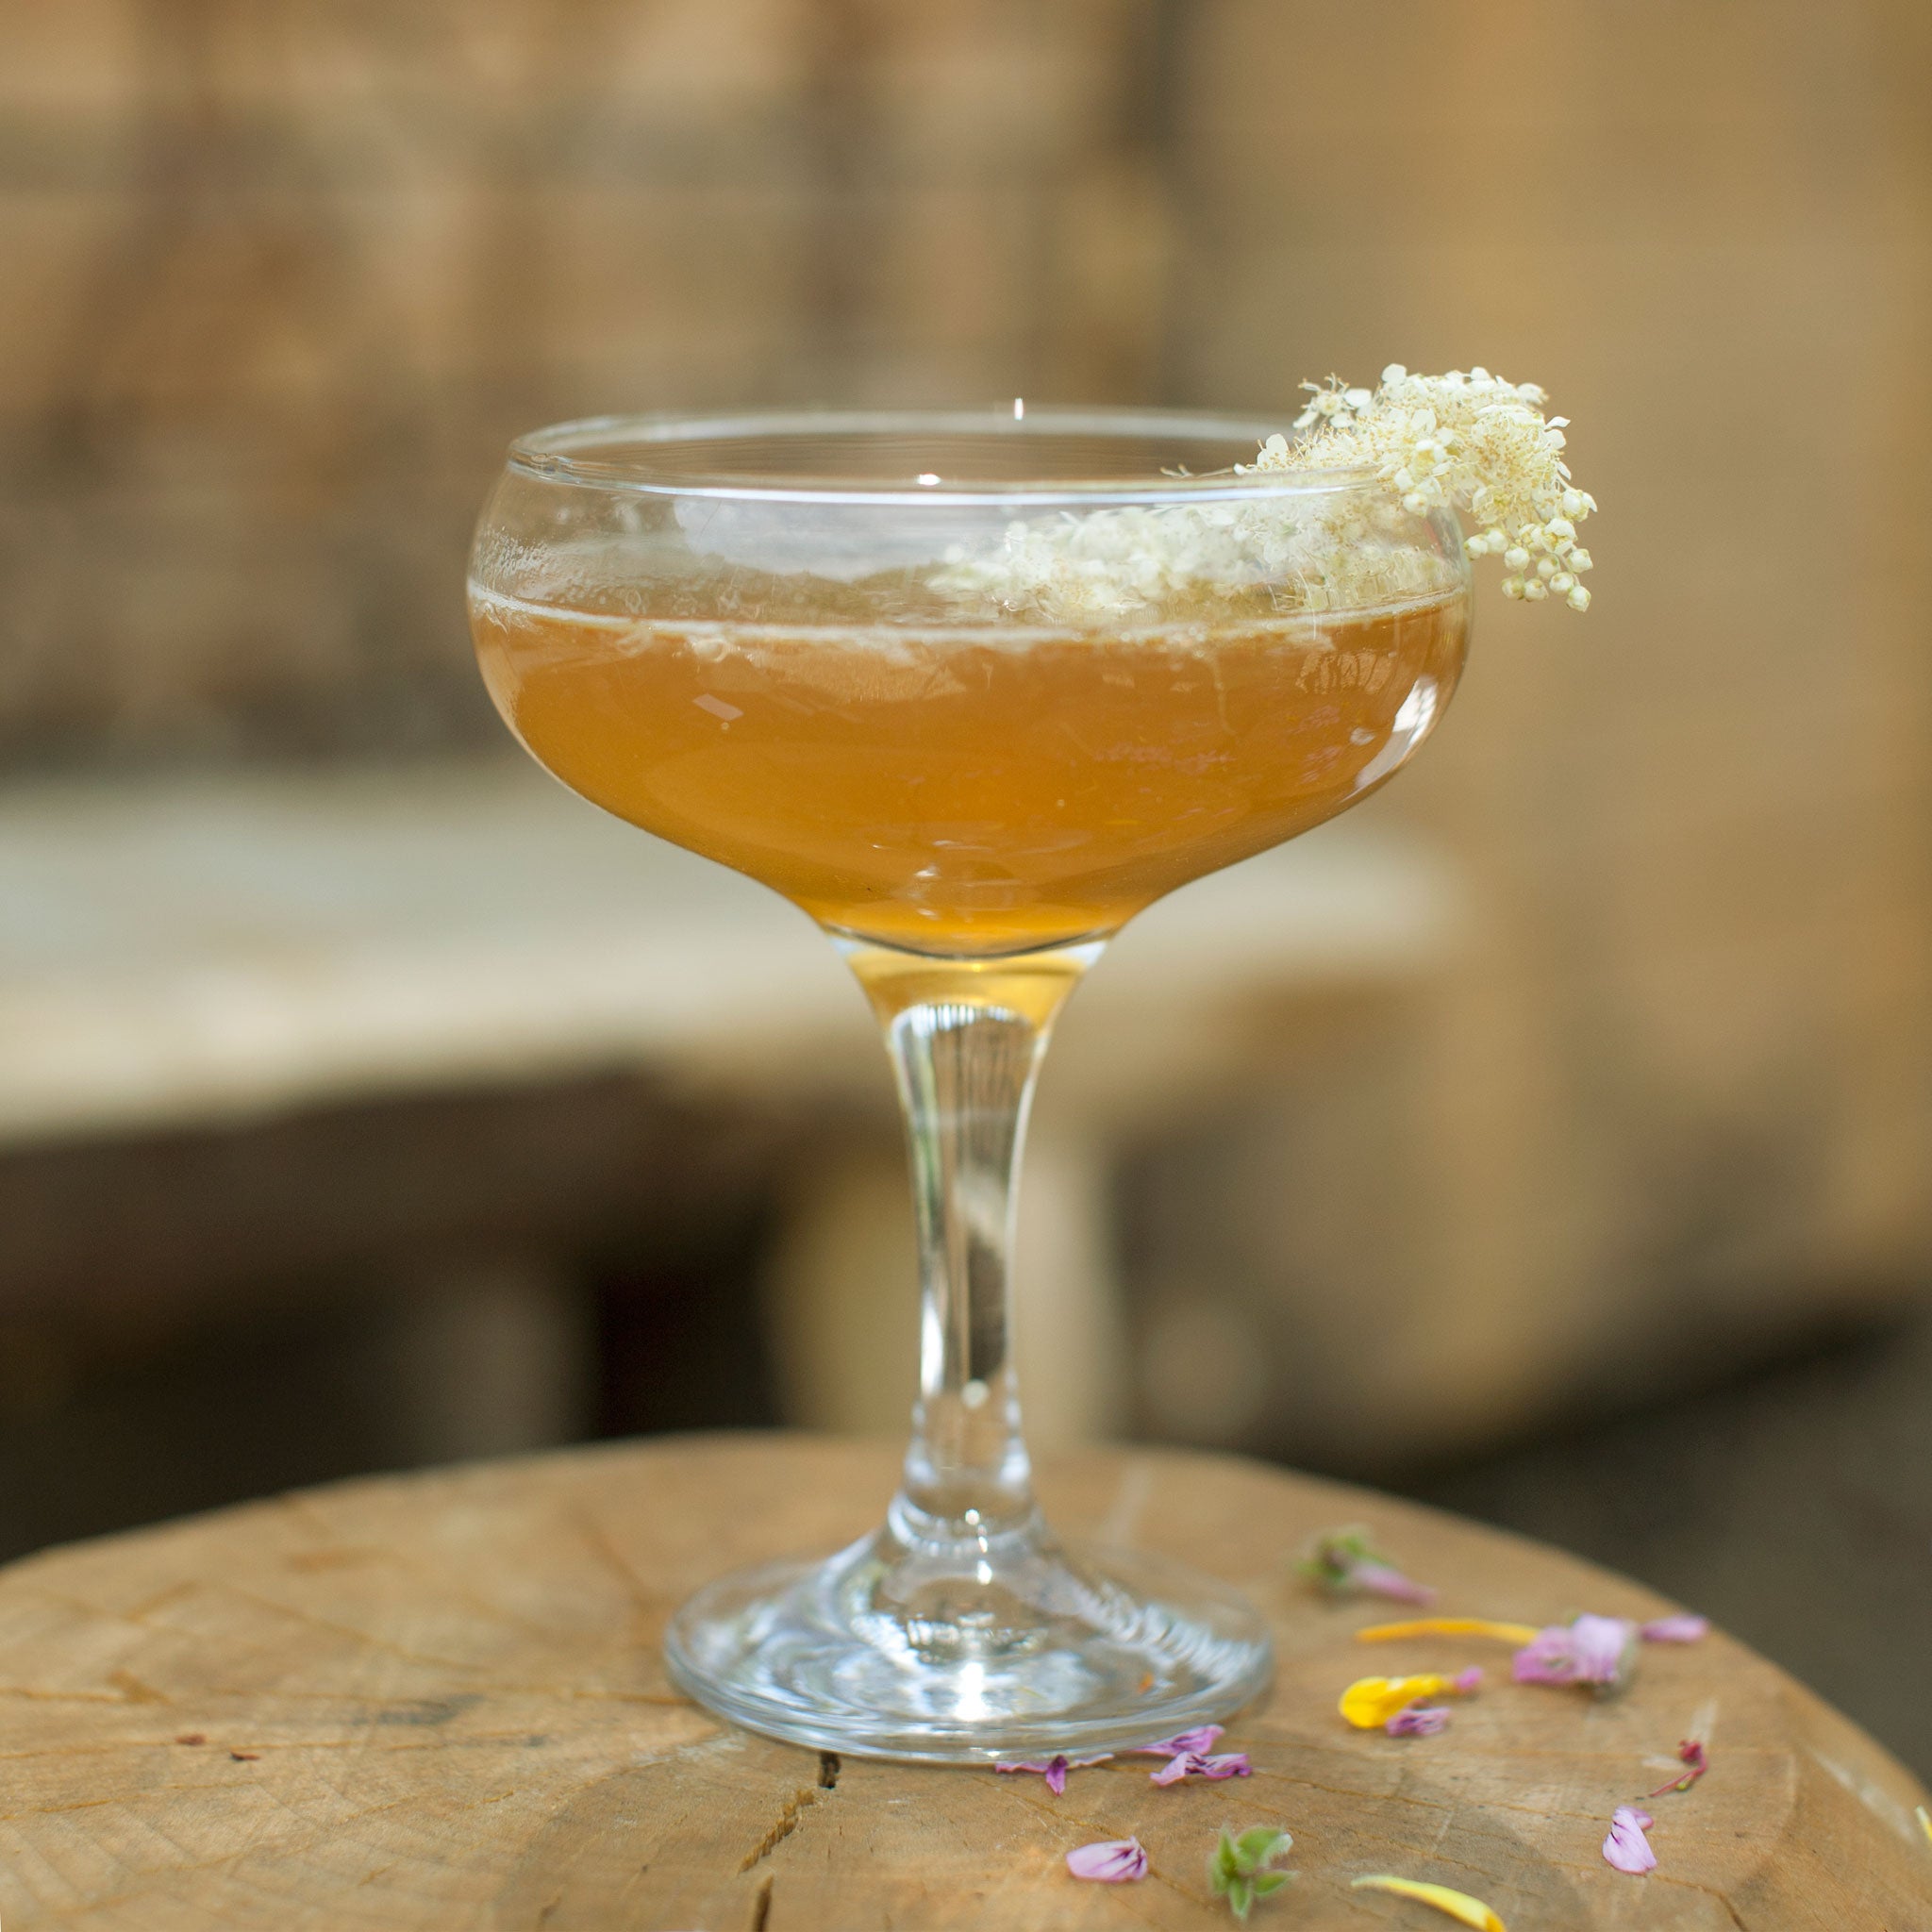 A Mighty Meadowsweet cocktail is made by topping the syrup with cognac, Grand Marnier and orange bitters